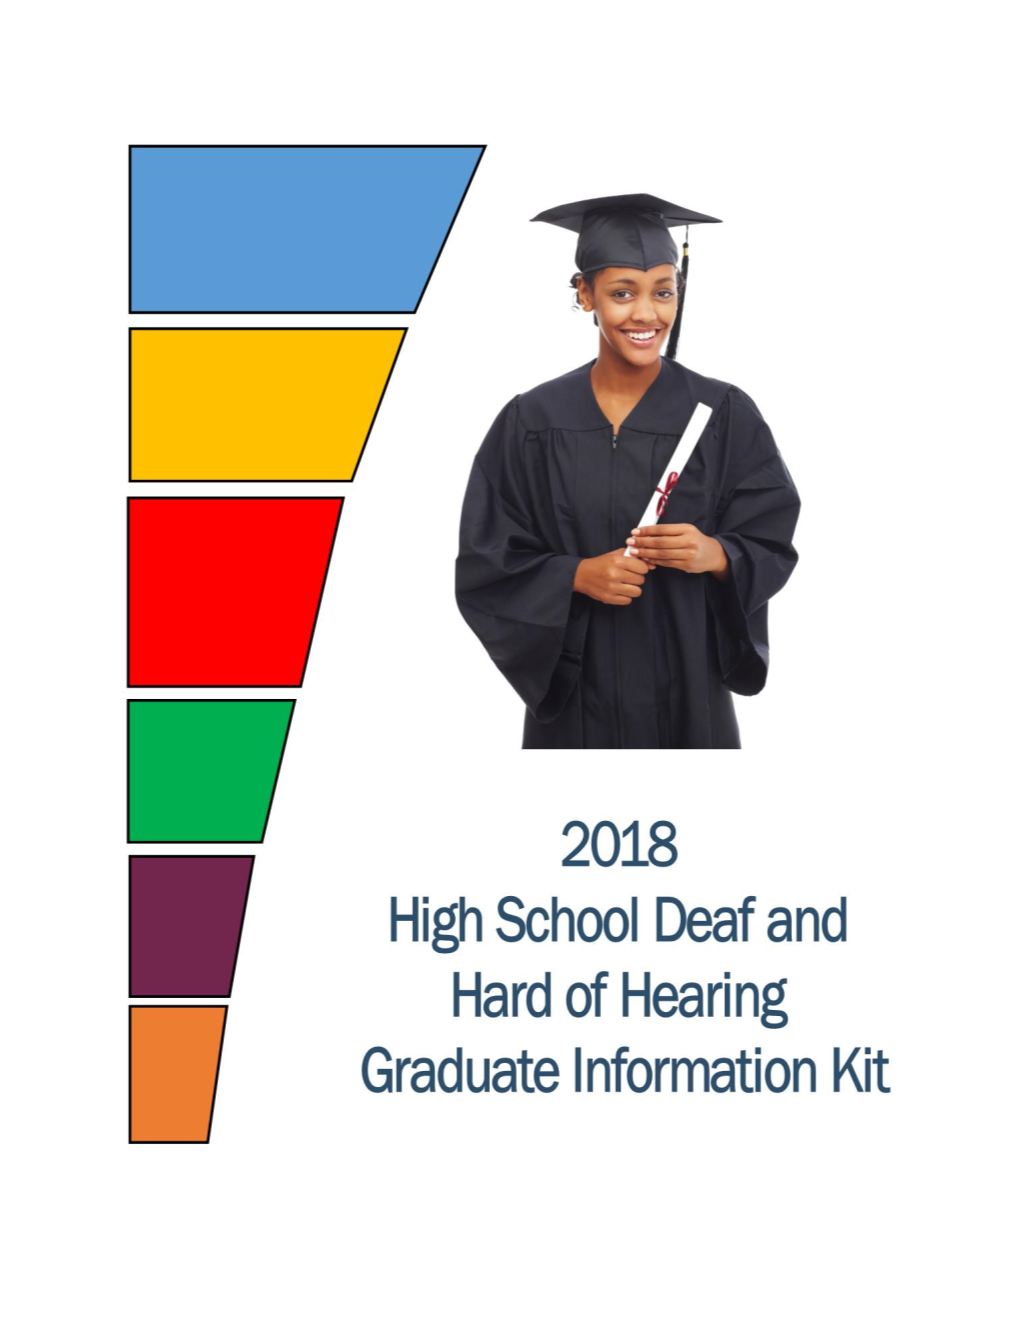 High School Graduate Information Kit Is a Gift to You in the Hope That You Will Find It Very Useful